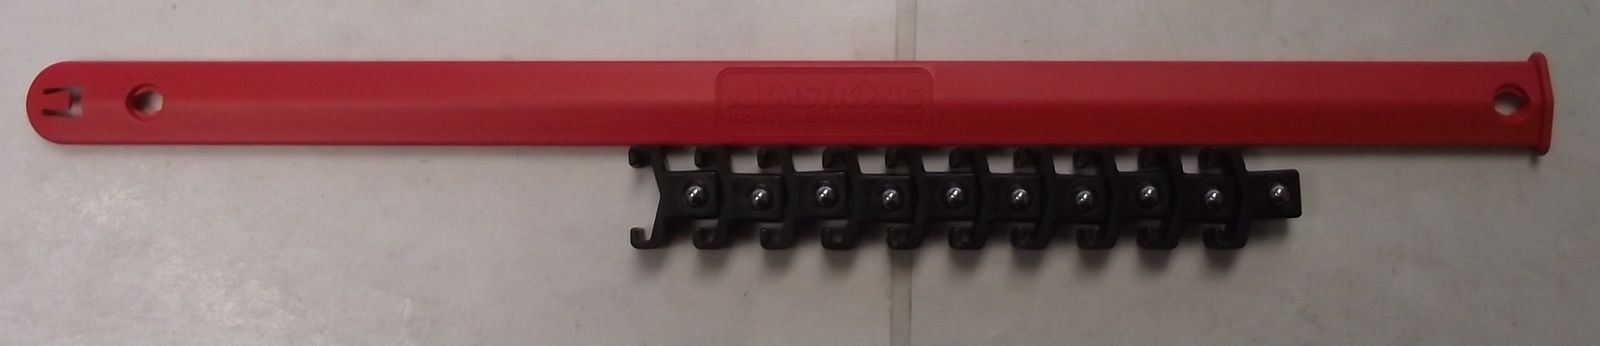 Armstrong 16-838 1/2" Drive Socket Rail Red 15" 10 Positions USA